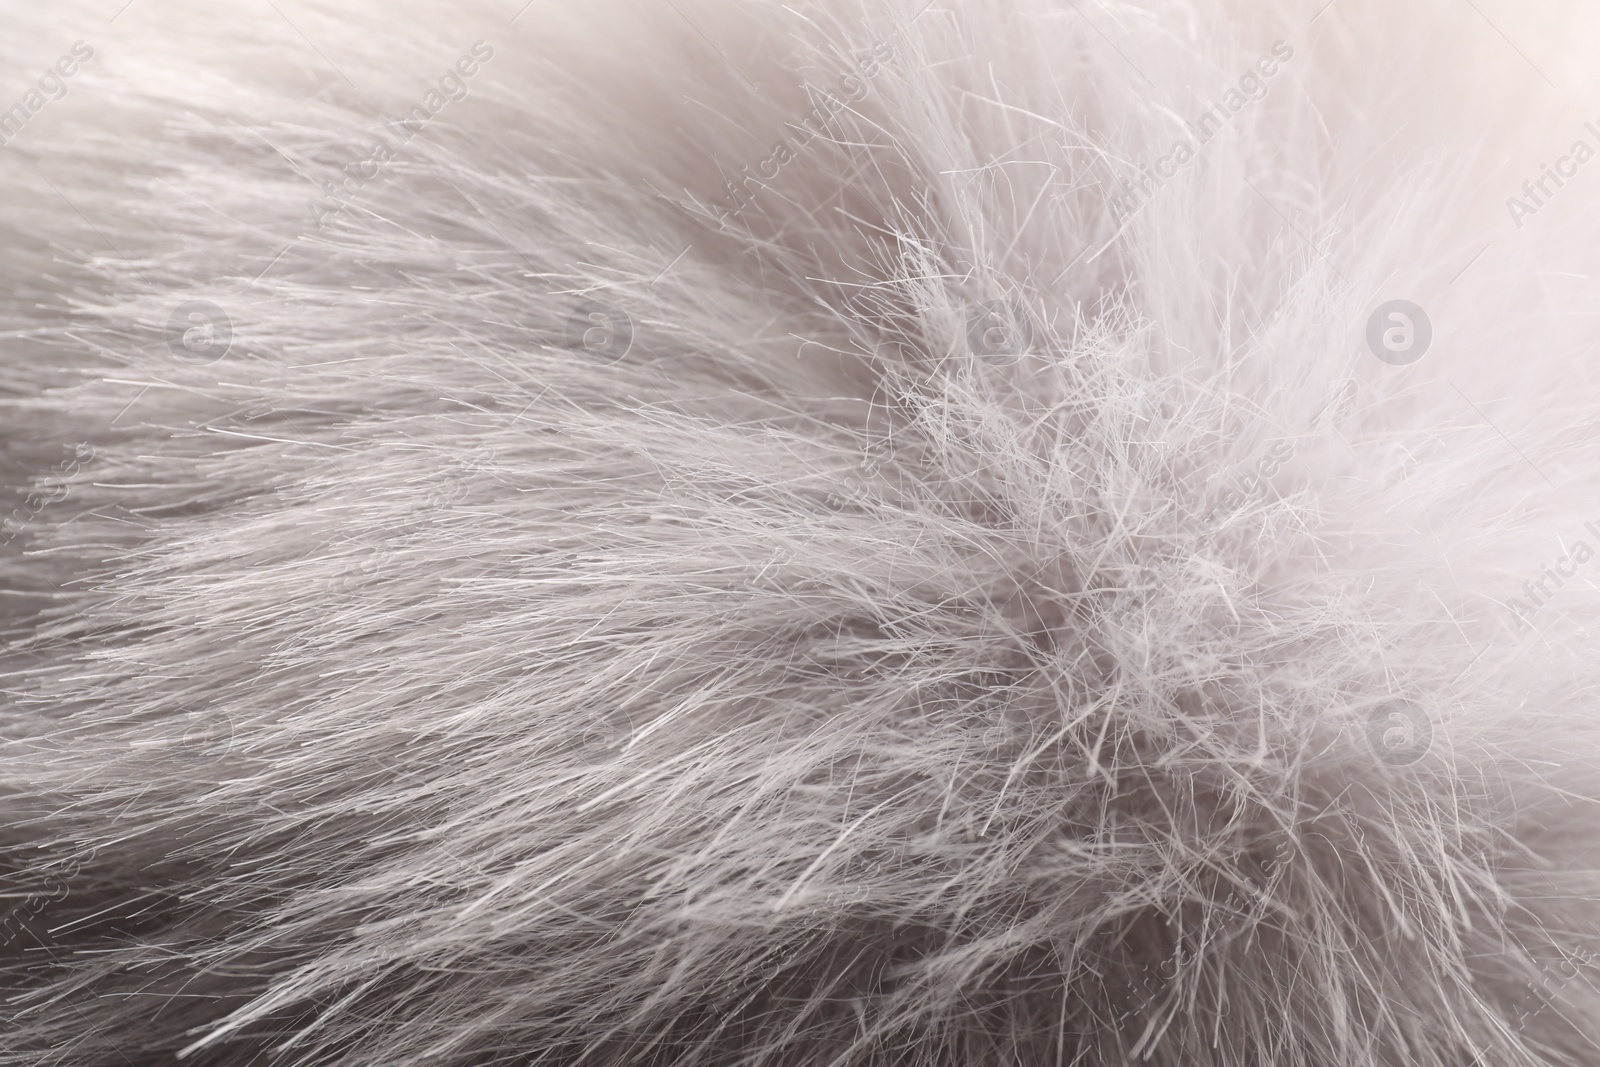 Photo of Texture of faux fur as background, closeup